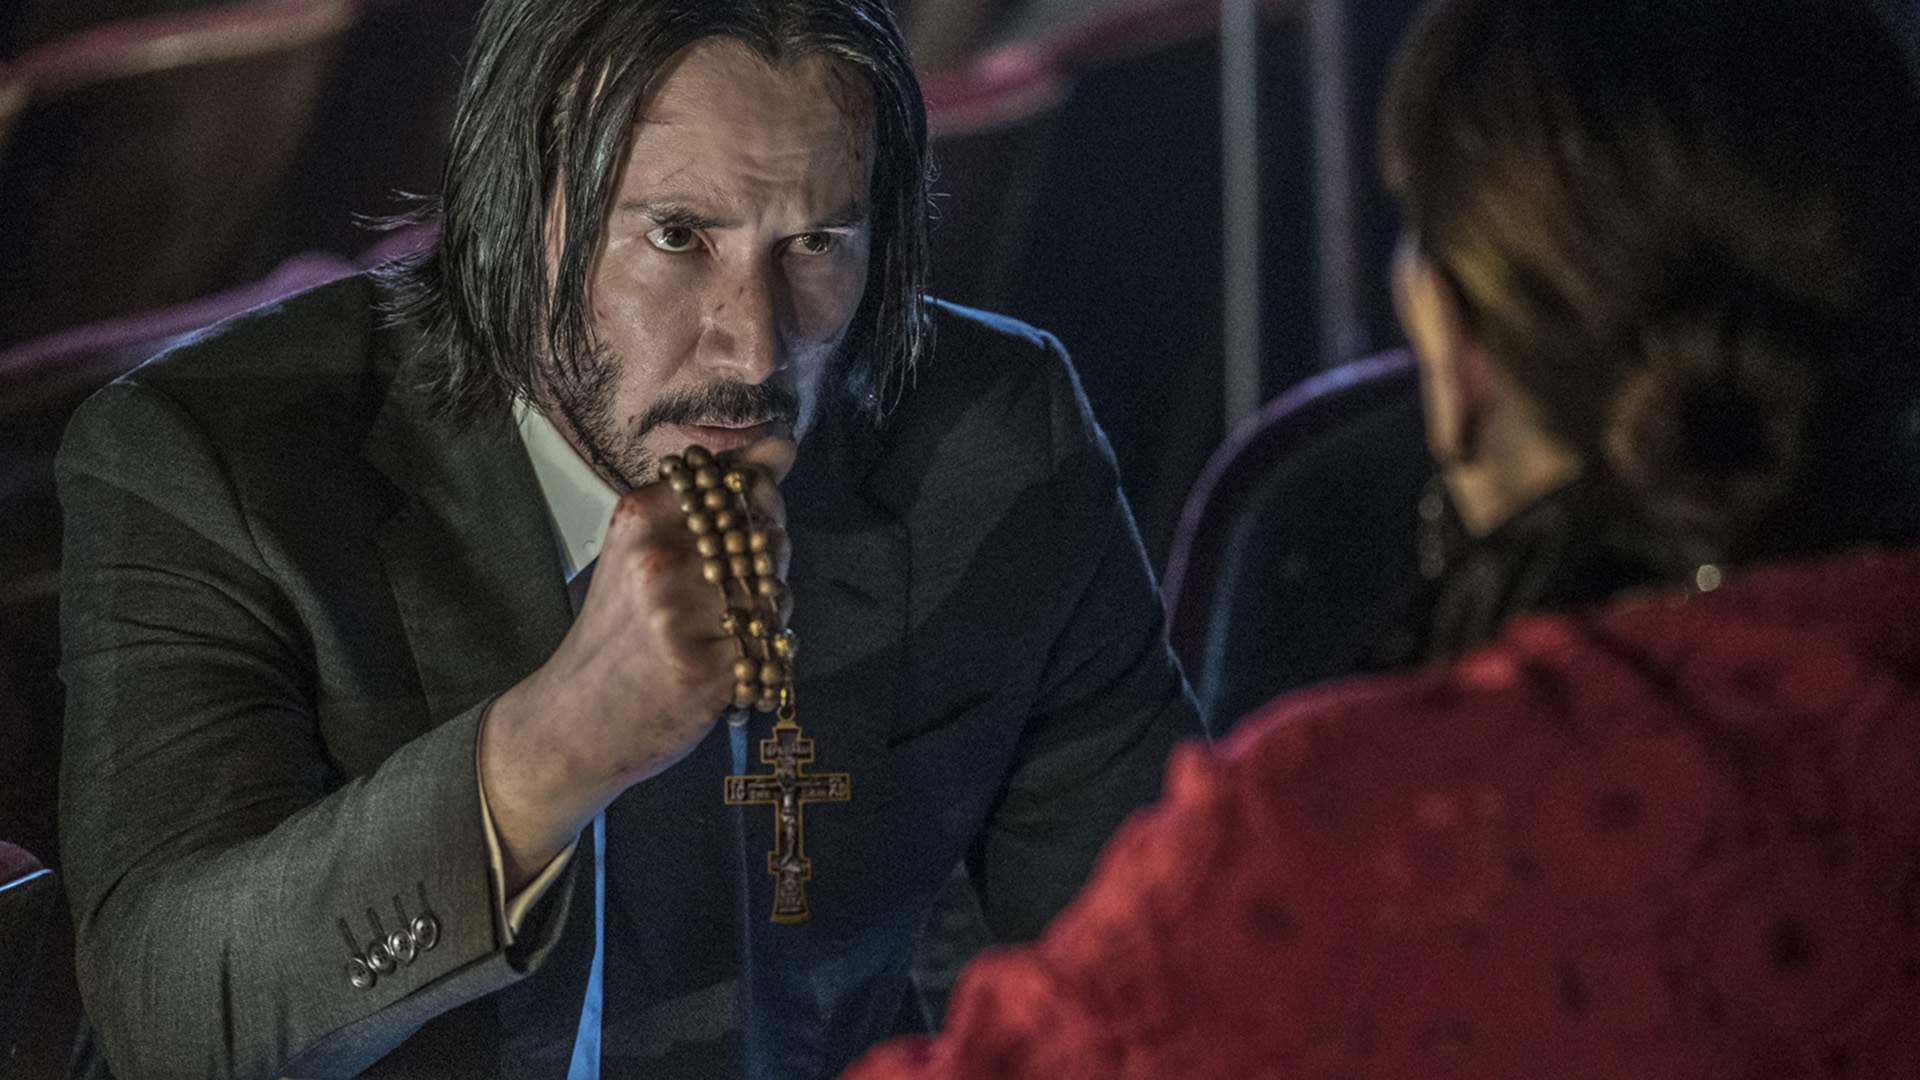 The Action-Packed First Trailer for 'John Wick: Chapter 3' Is Here